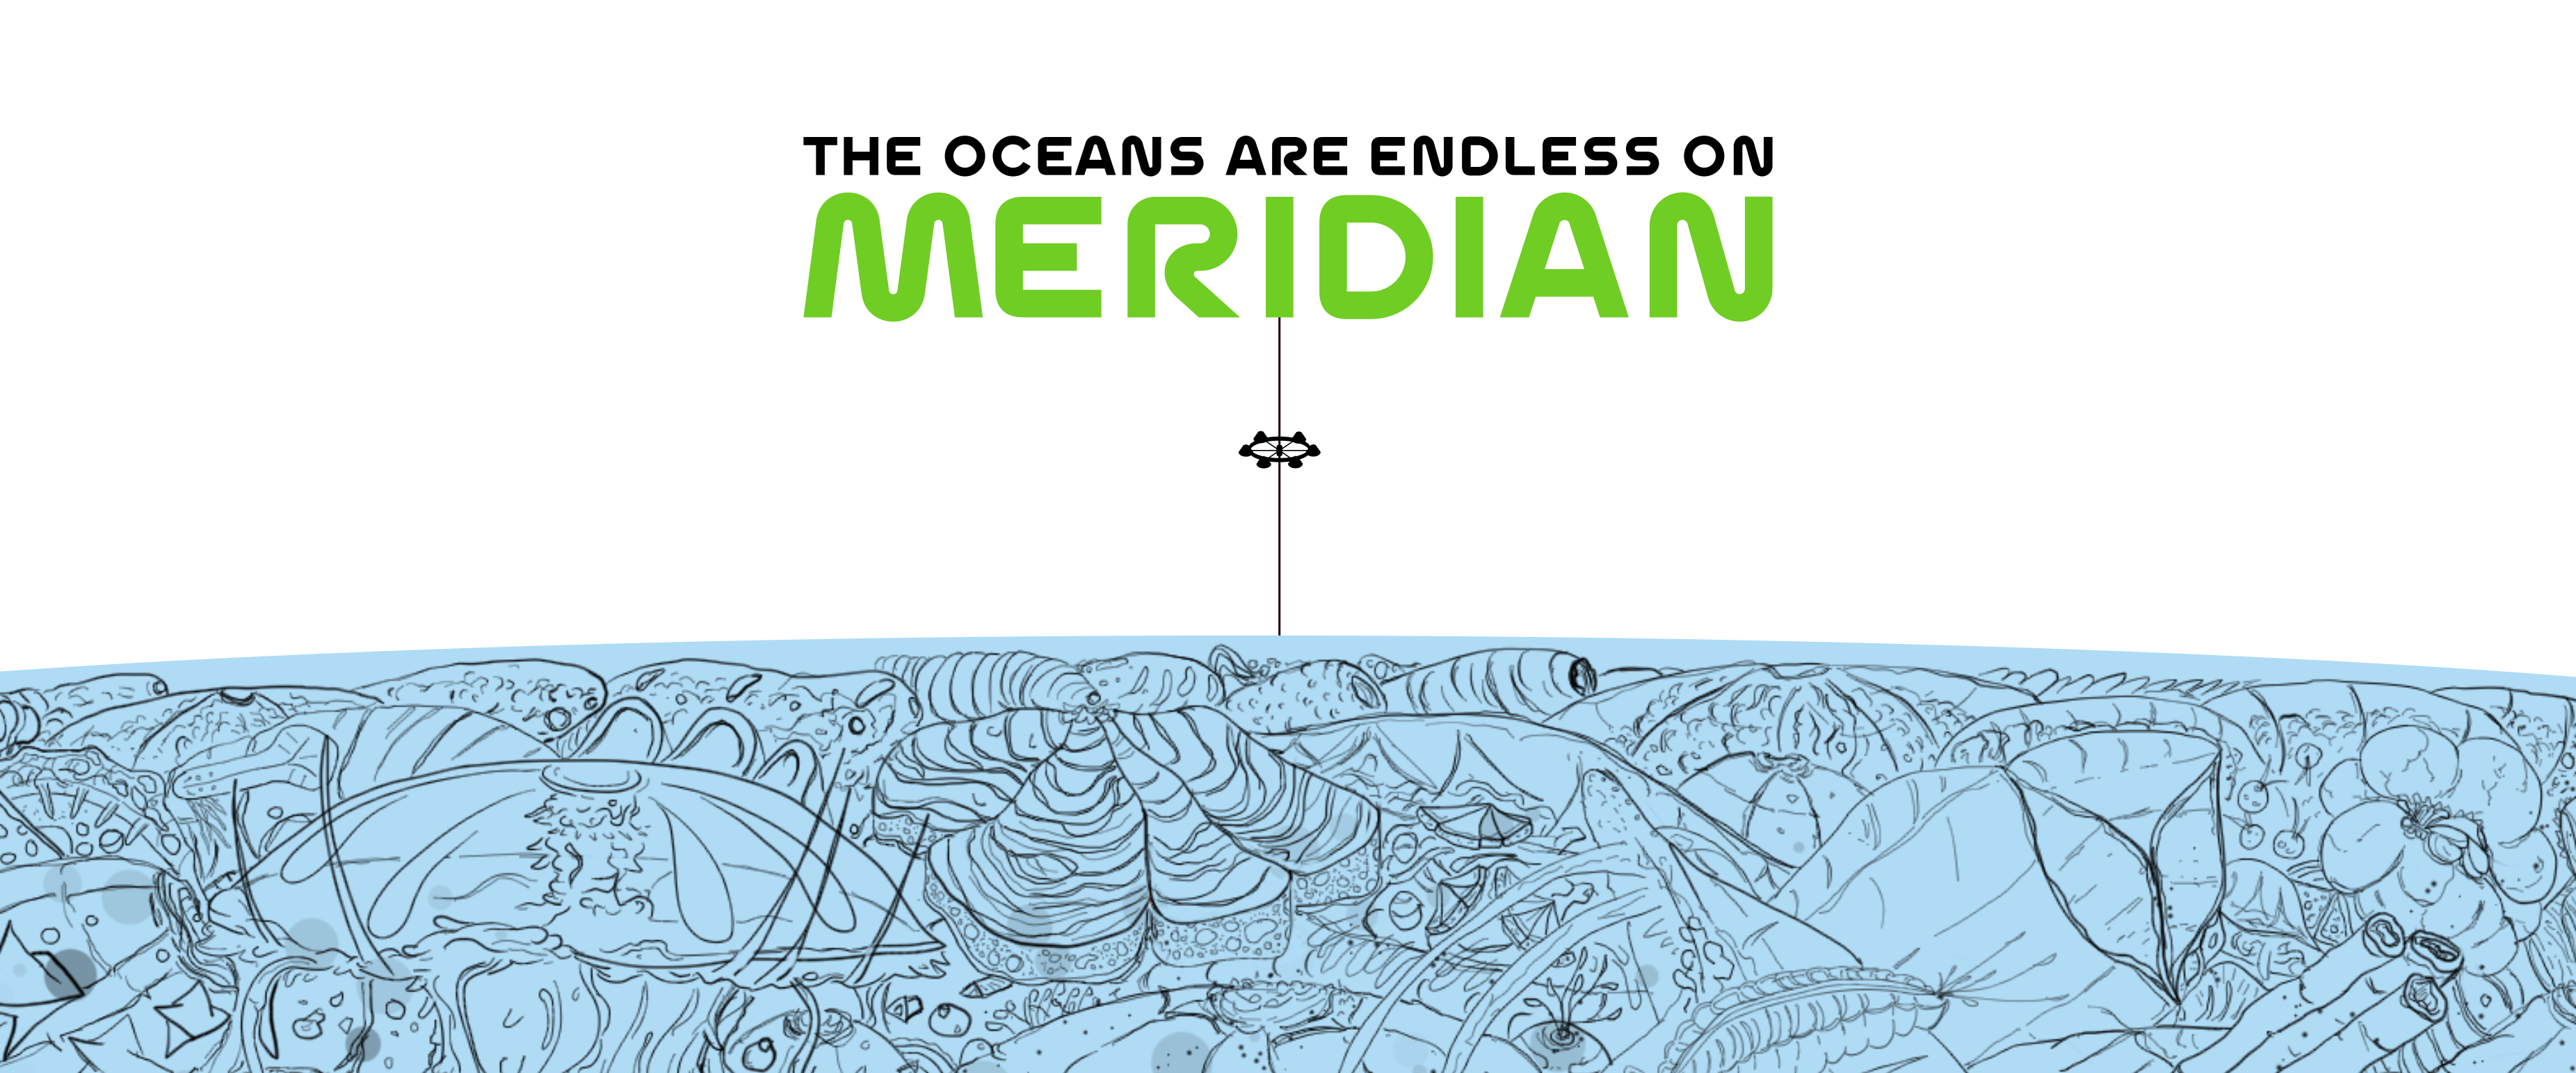 The Oceans are Endless on Meridian